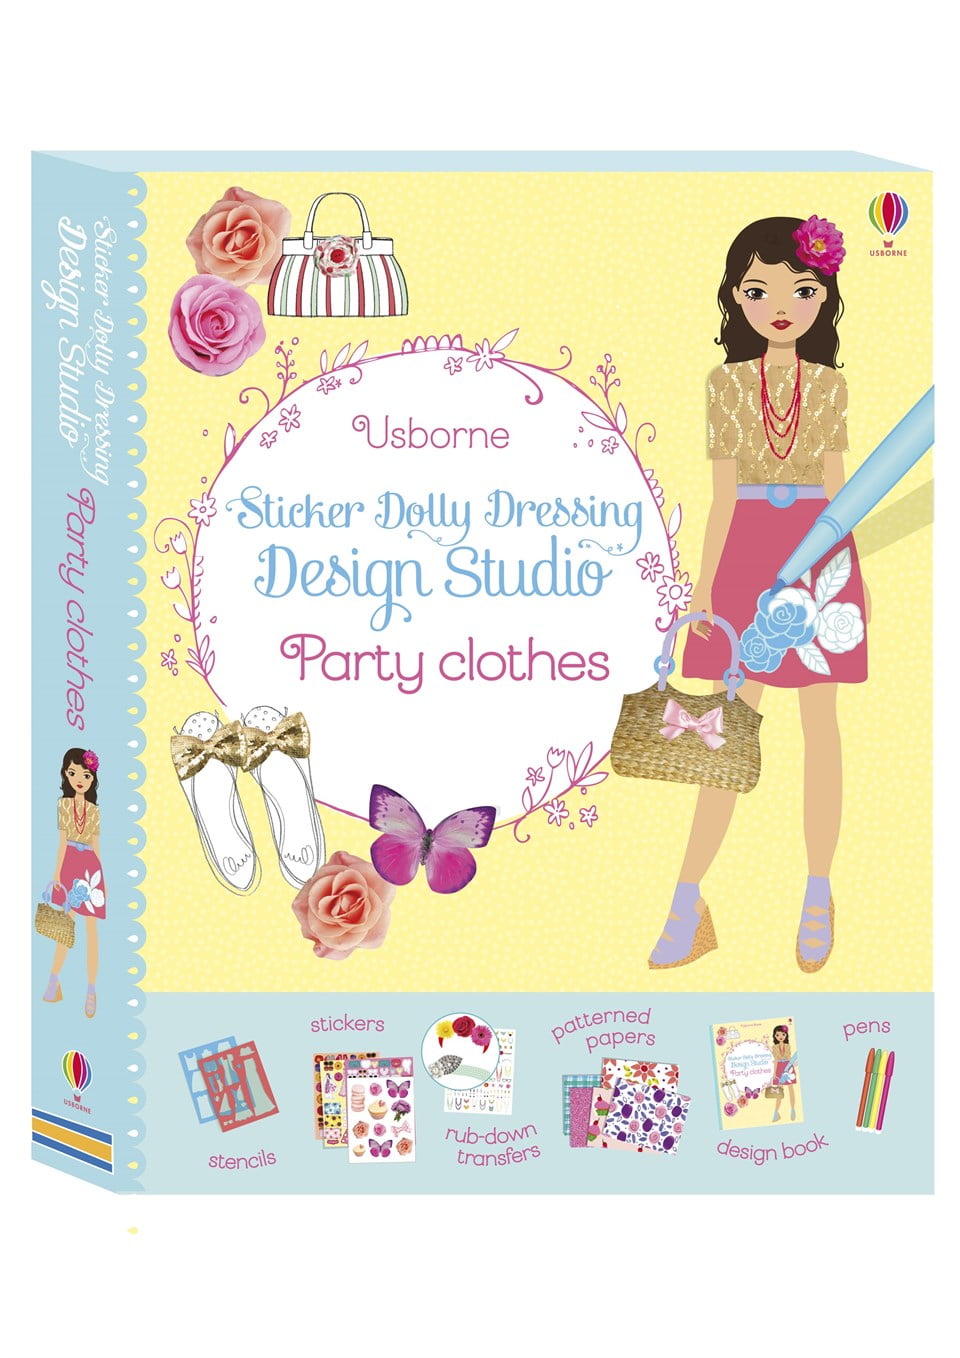 sticker-dolly-dressing-design-studio-party-clothes